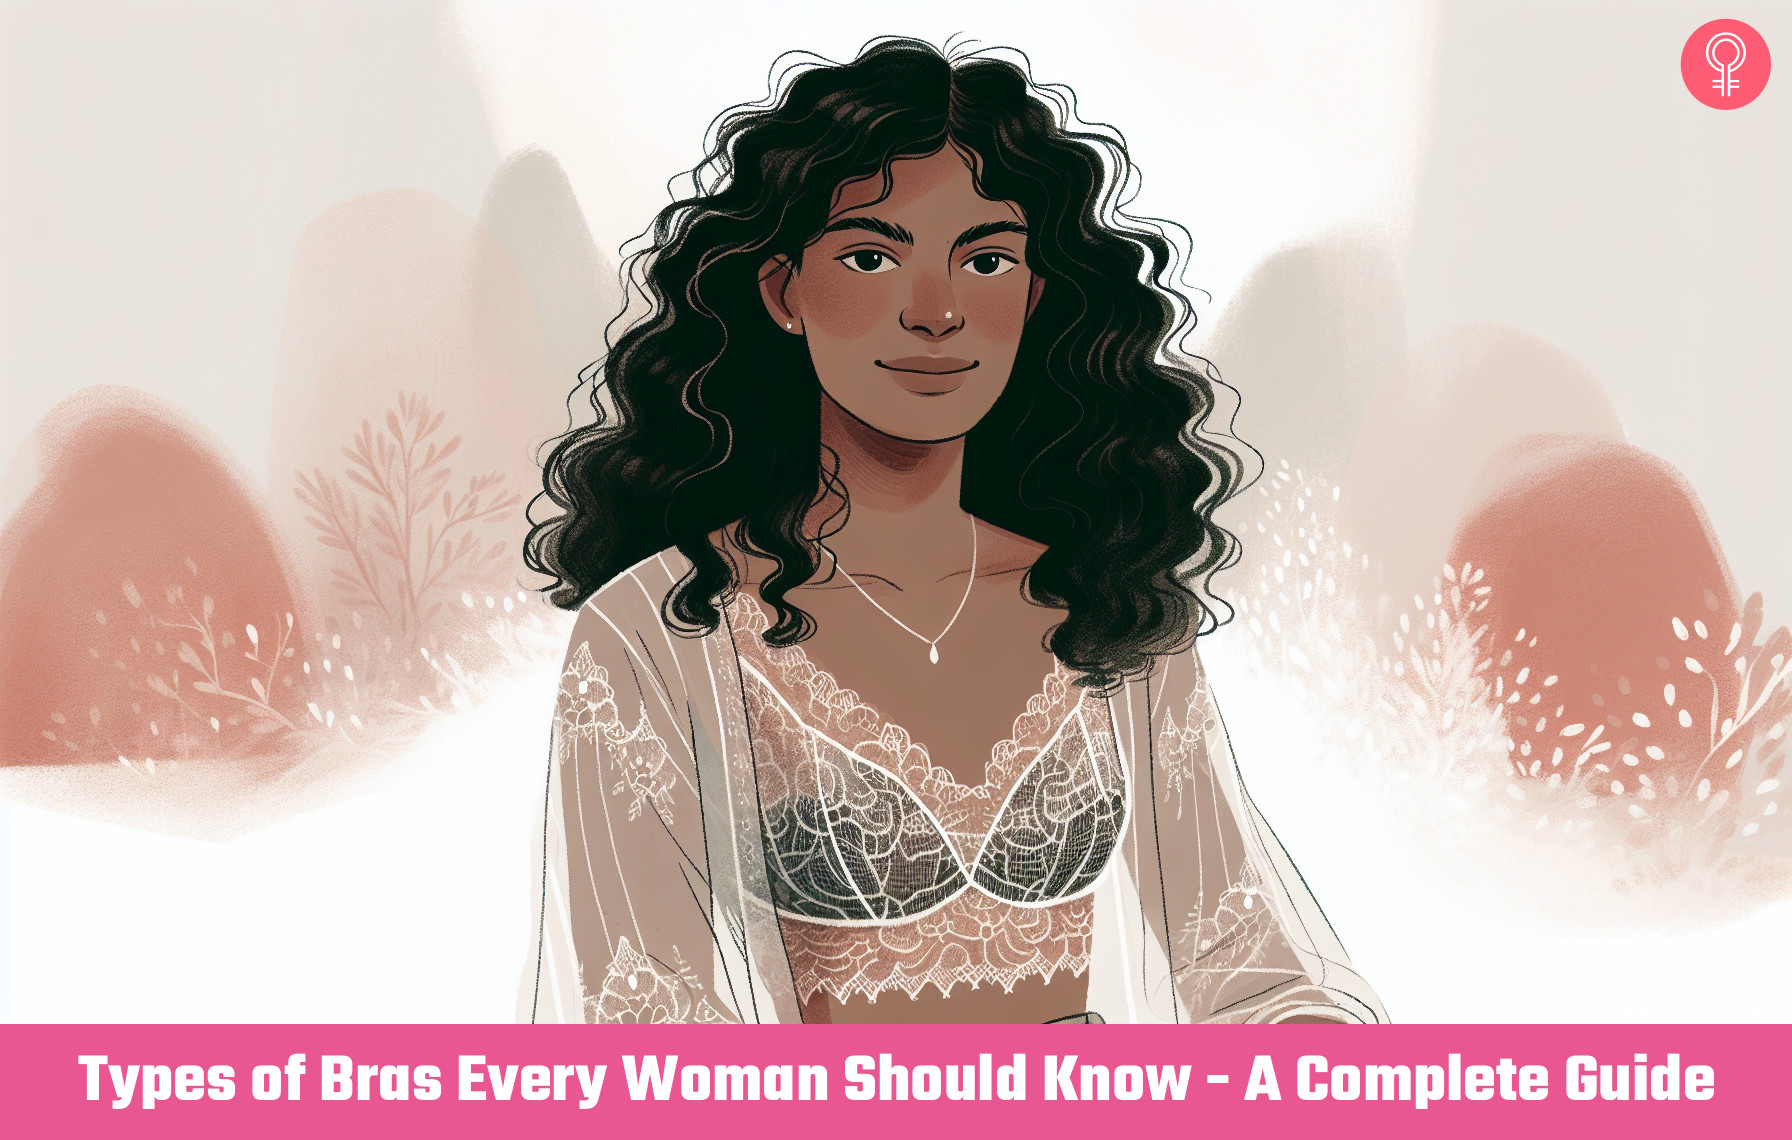 Comprehensive Guide to Types of Bra: 30 Varieties for Every Woman